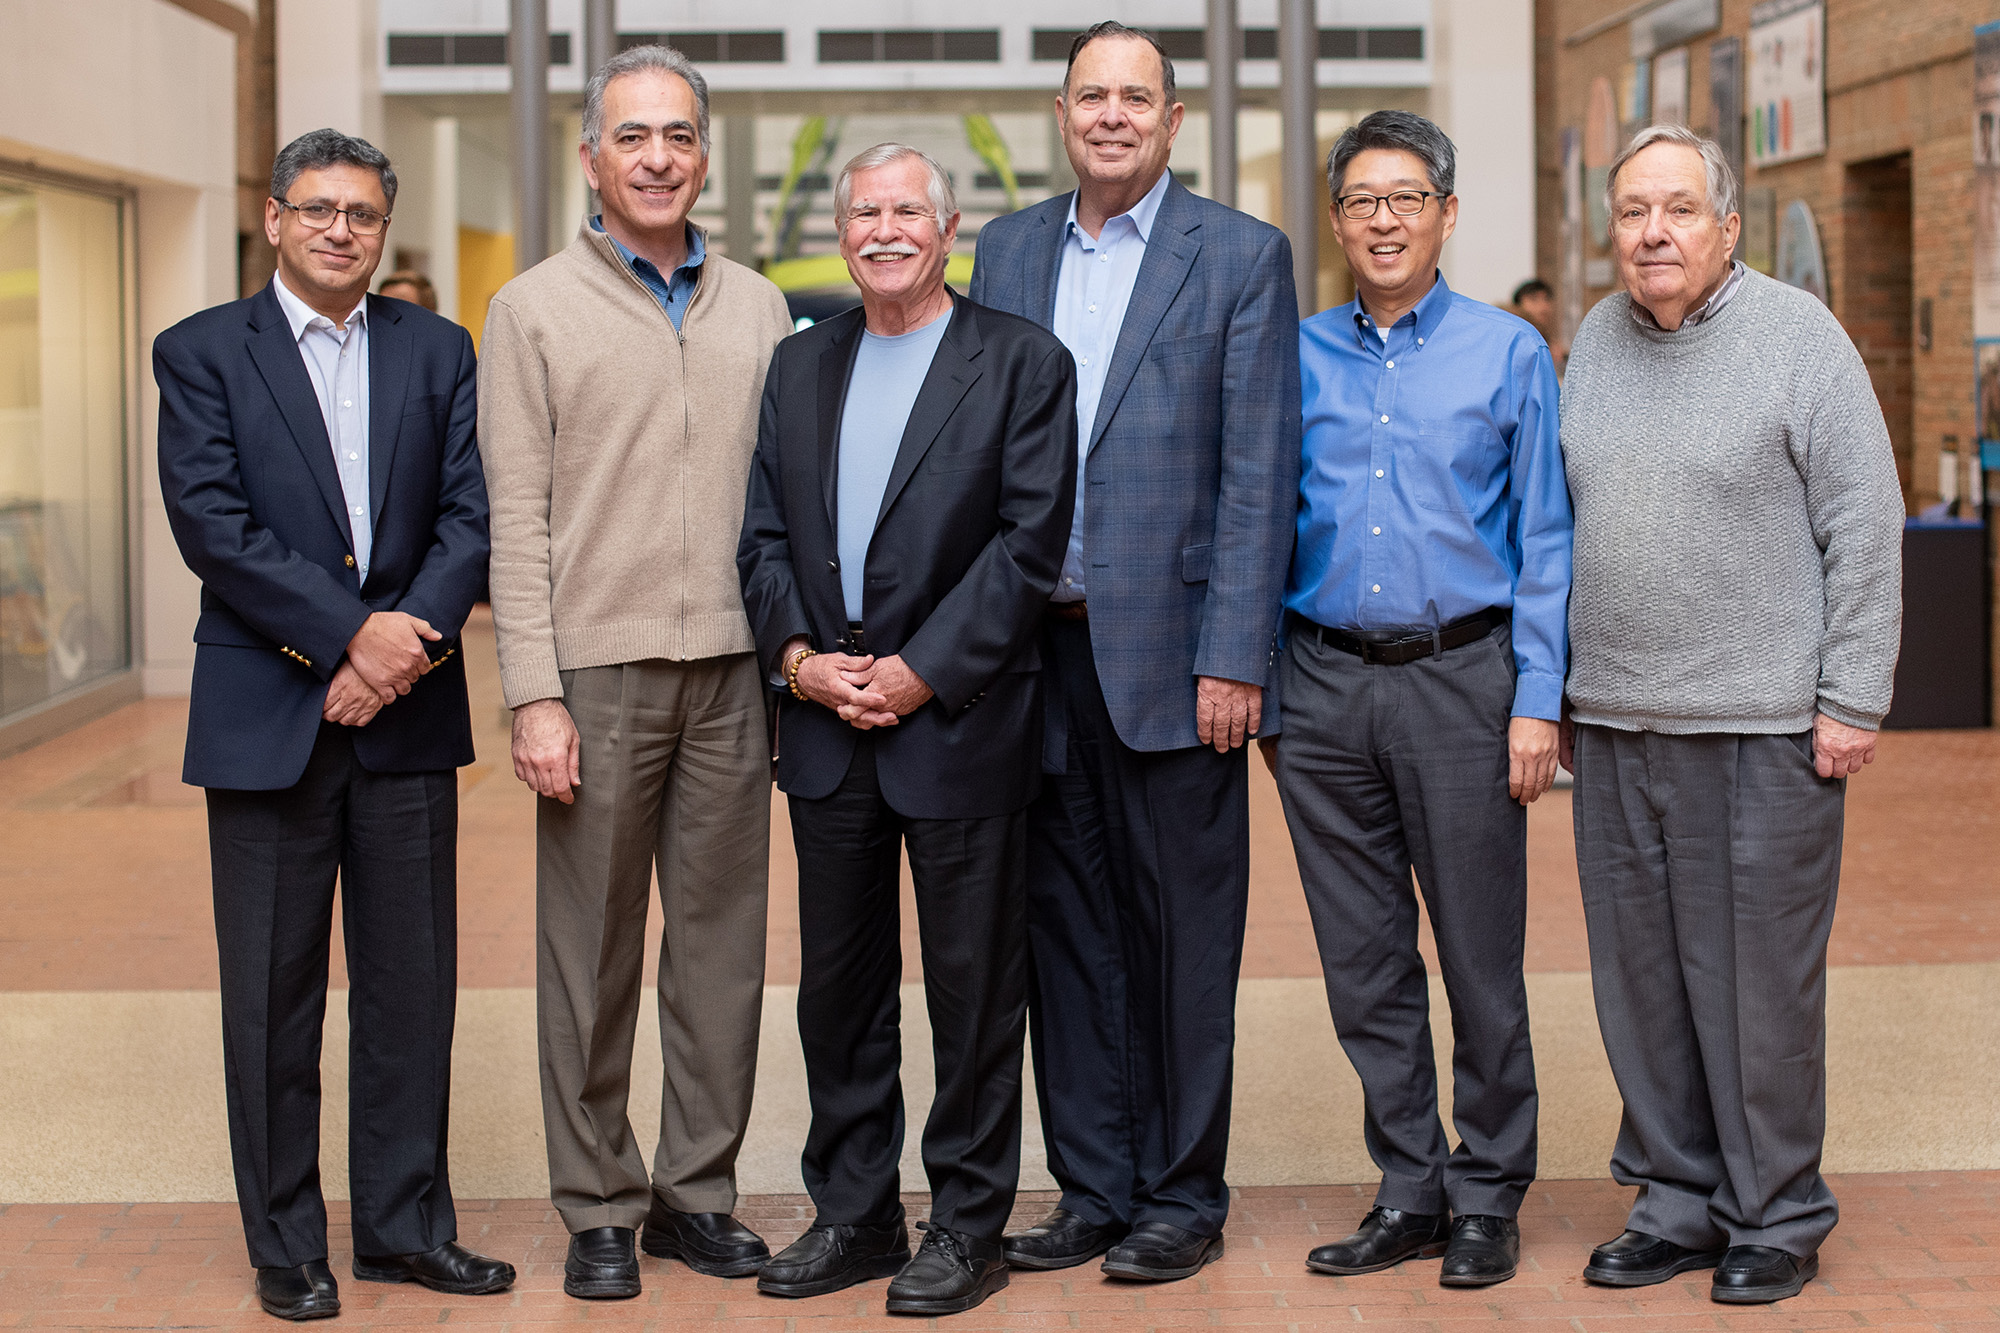 Dr. Kurt Petersen stands with a group of current and former faculty